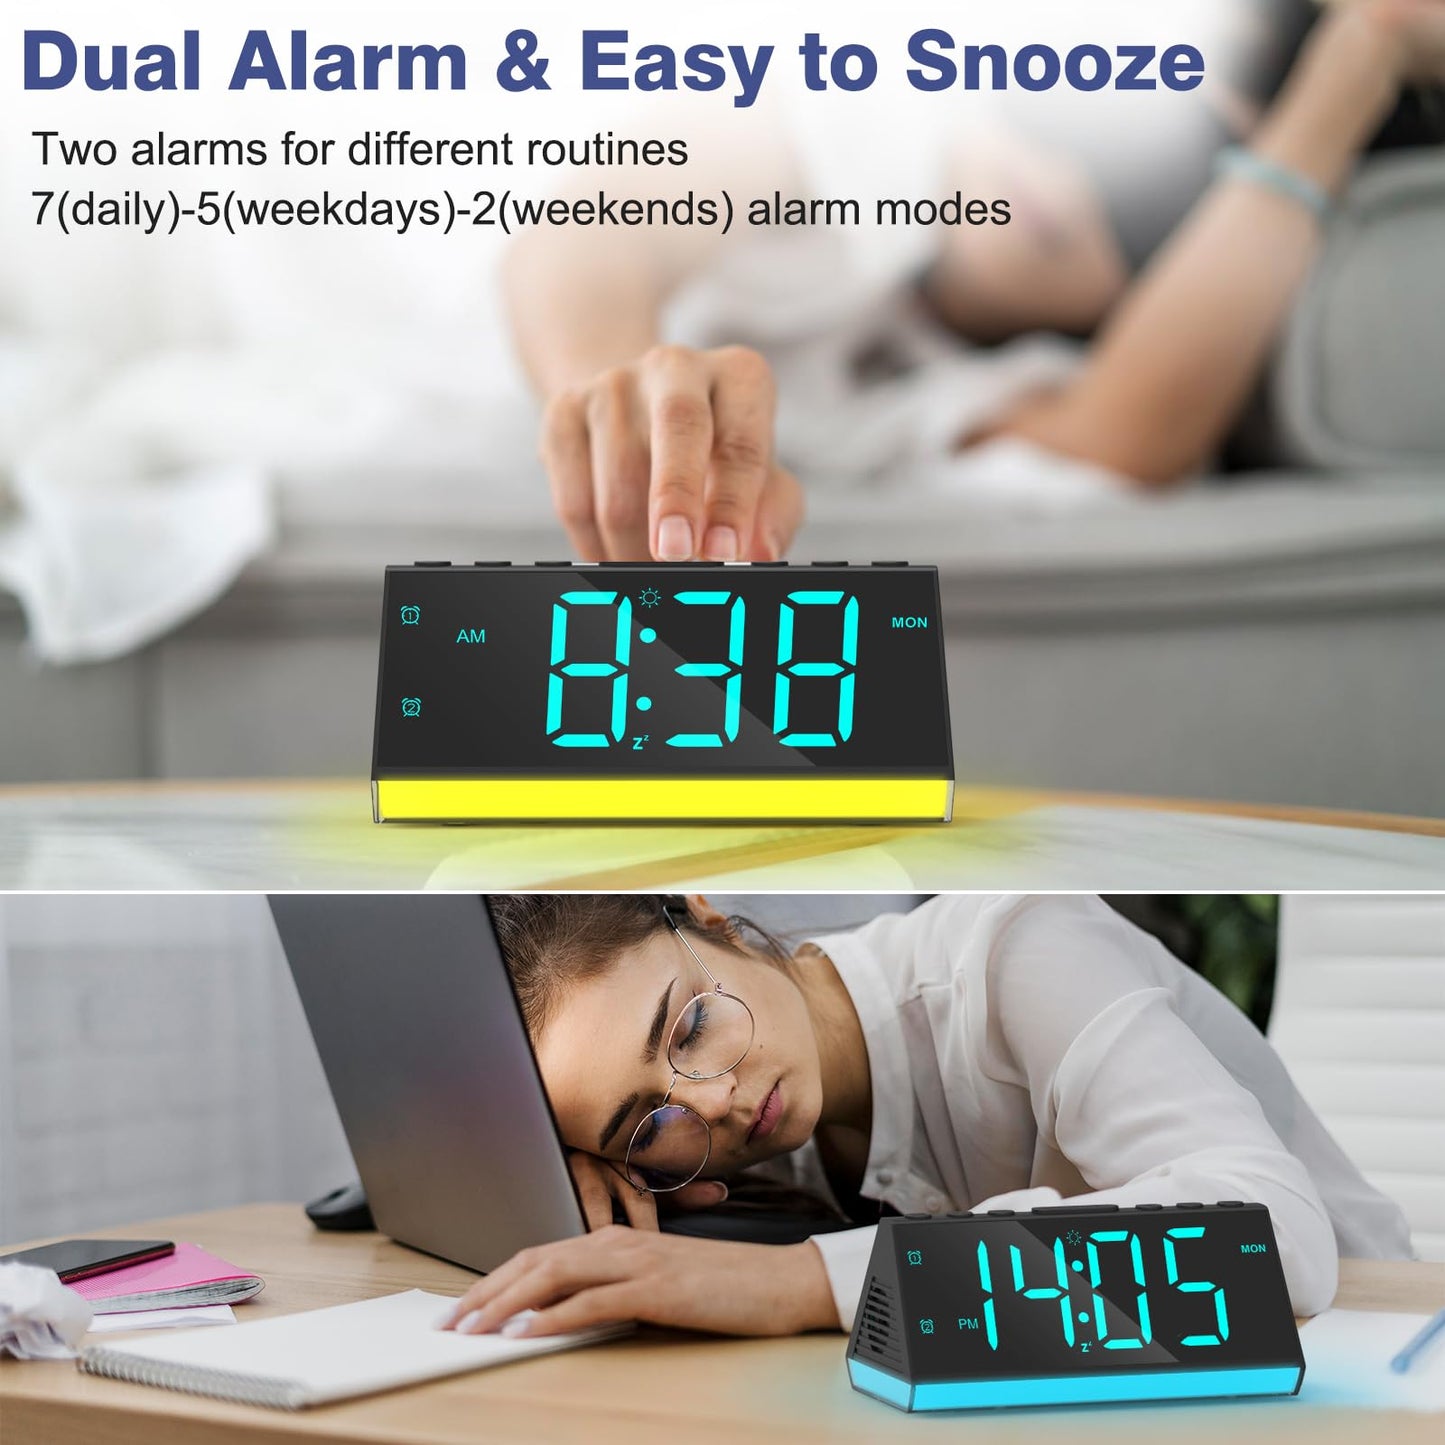 Alarm Clocks for Bedrooms, Digital Kids Alarm Clock Night Light with USB Chargers, Large Number, Dimmer, Dual Alarm, Loud Bedside Clock for Heavy Sleepers Teens Living Room Desk Nightstand, Plug-in